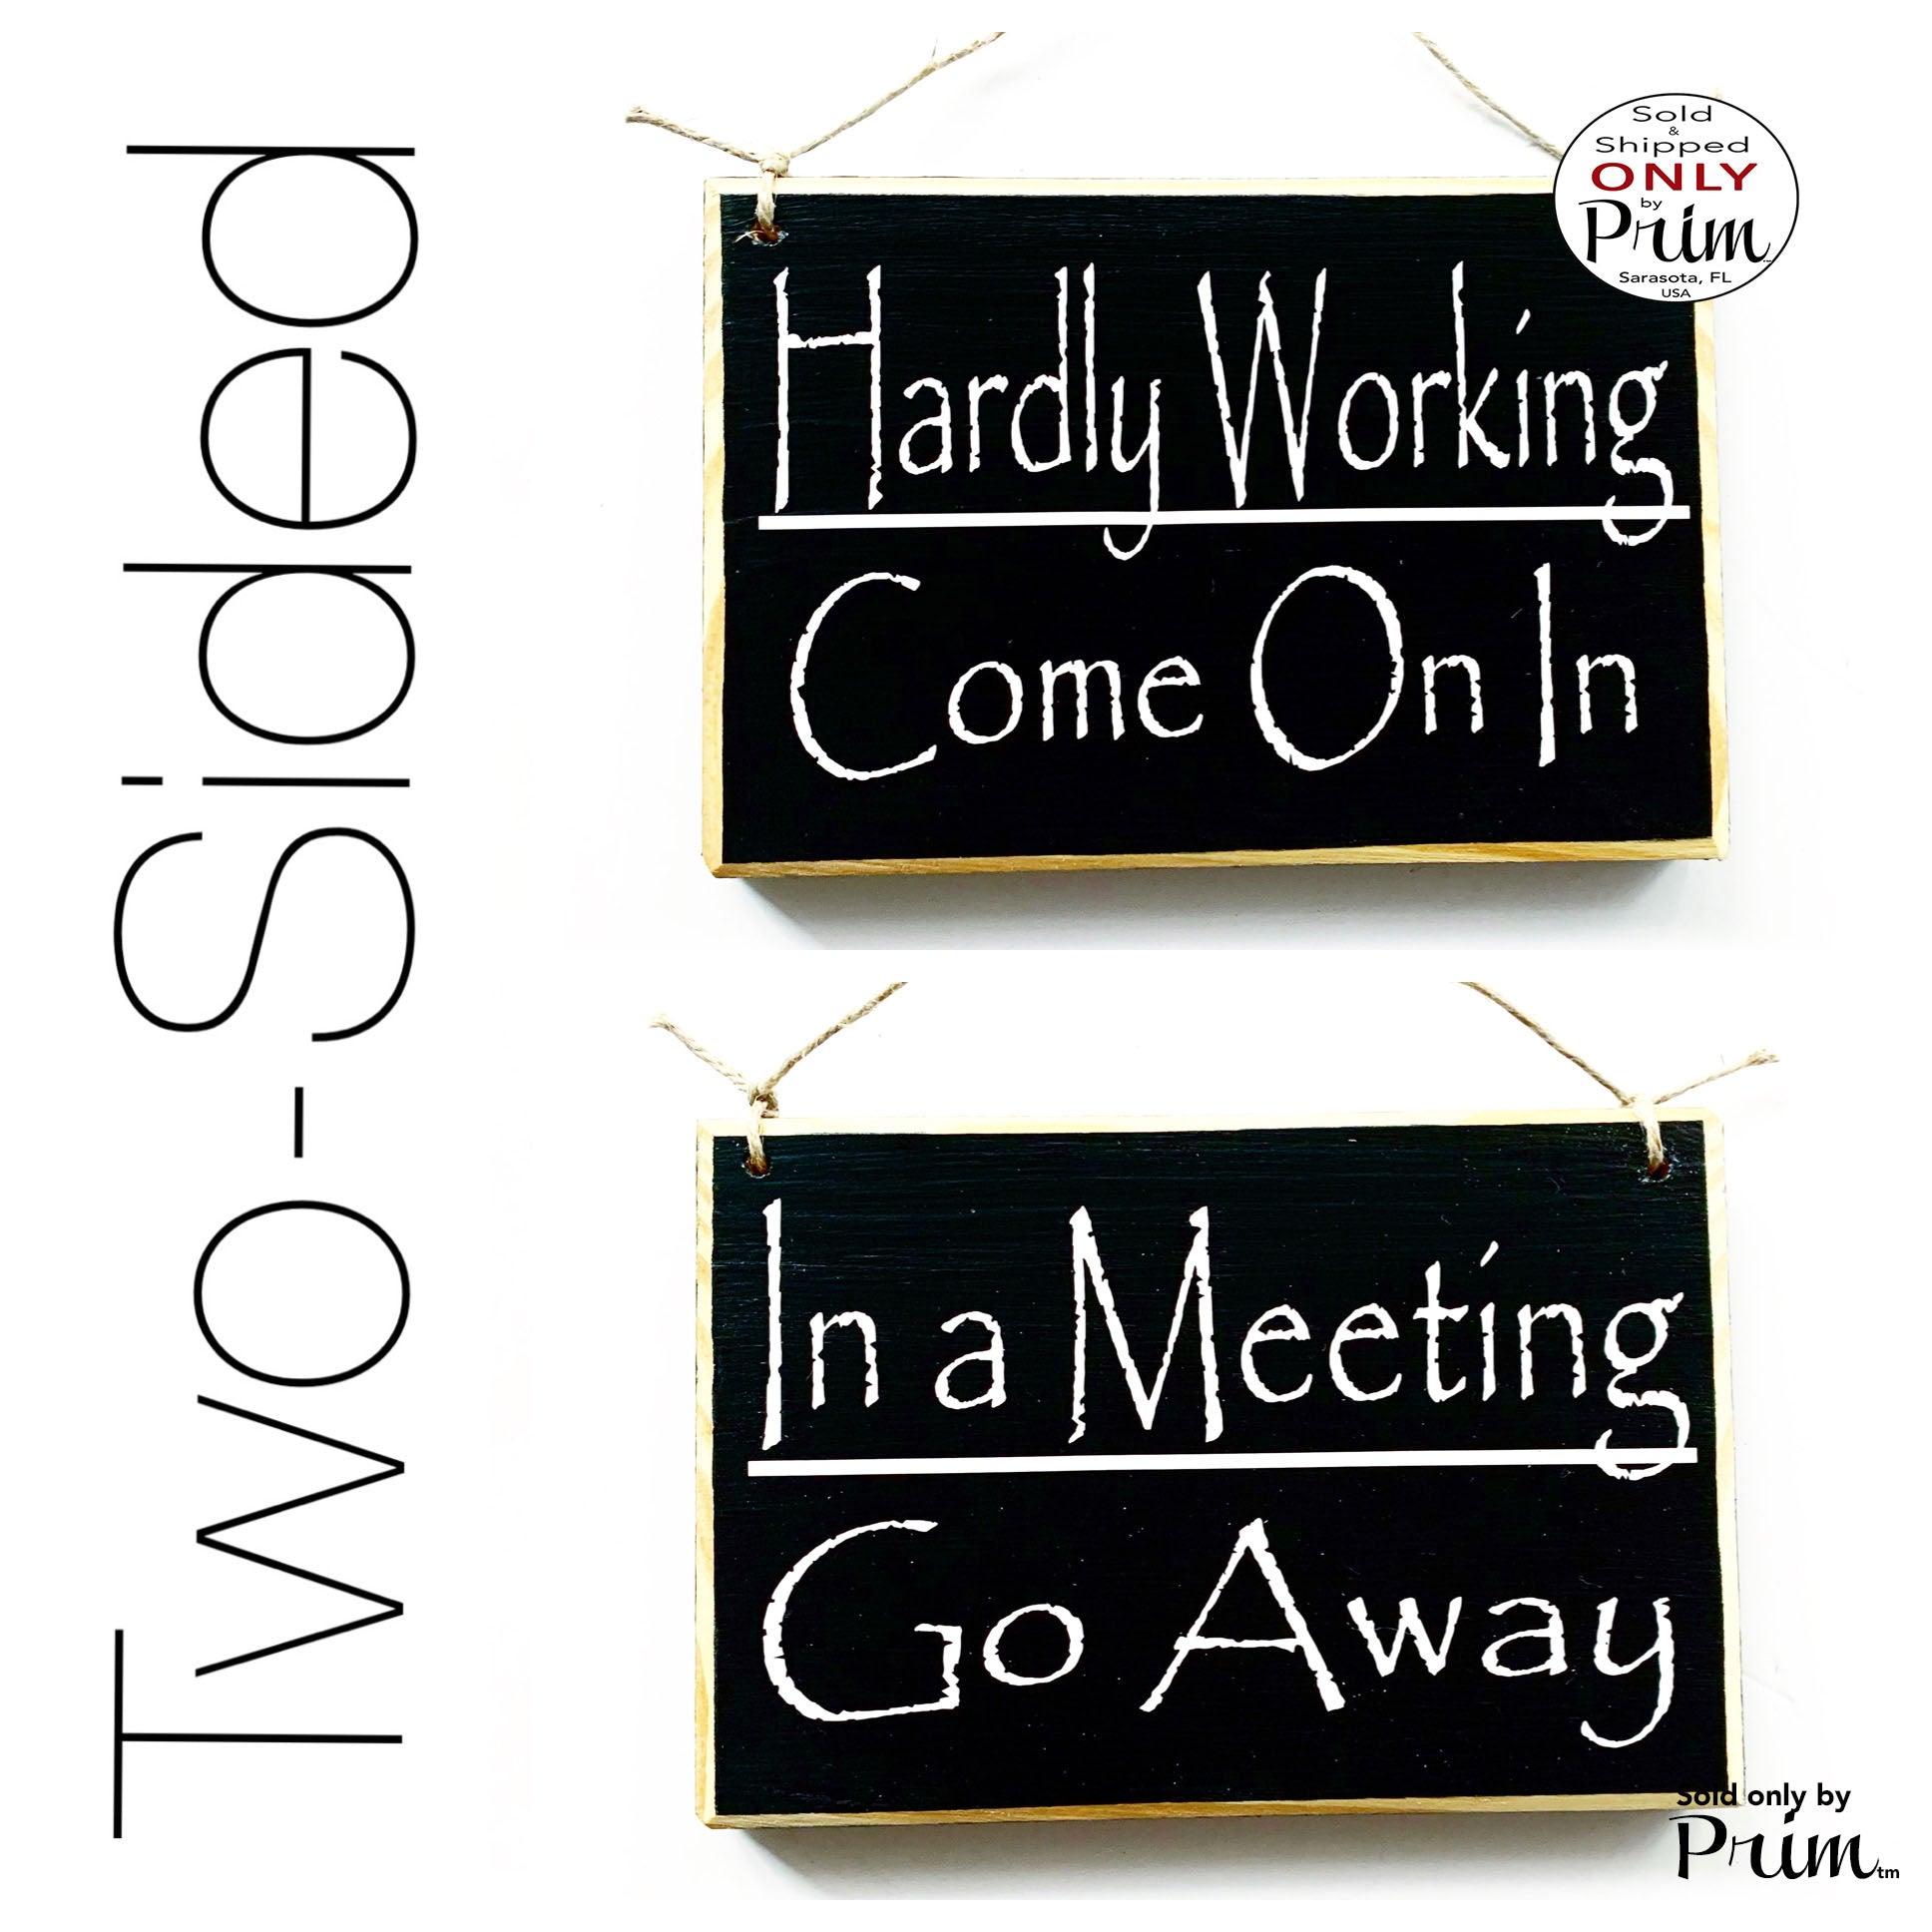 Designs by Prim 8x6 Two Sided Hardly Working Come On In / In A Meeting Go Away Custom Wood Sign Please Do Not Disturb  Busy Unavailable Office Door Plaque